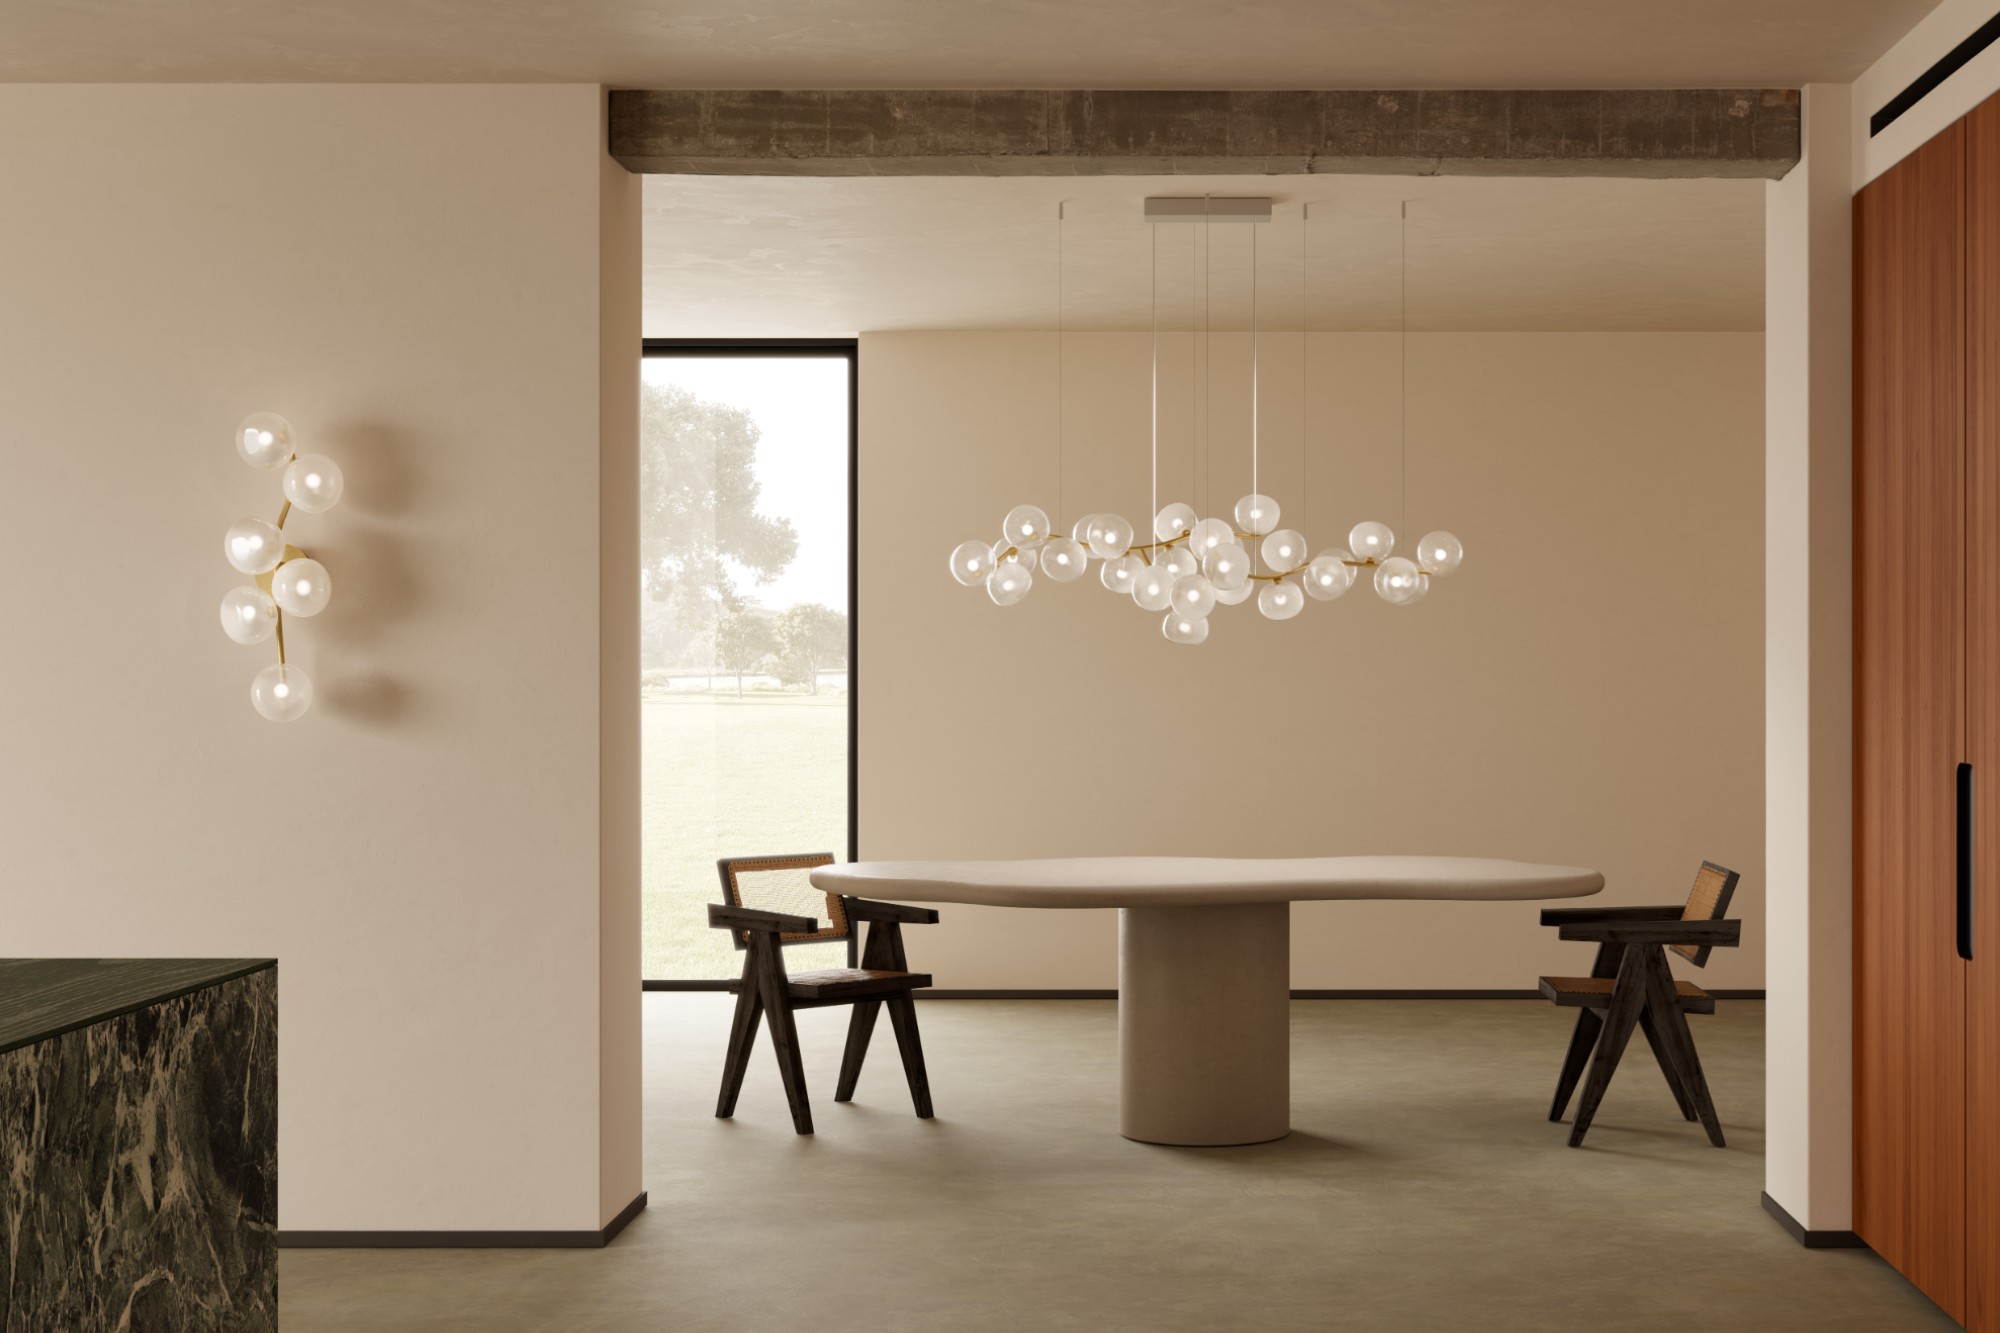 IDS launches Giopato & Coombes light designs